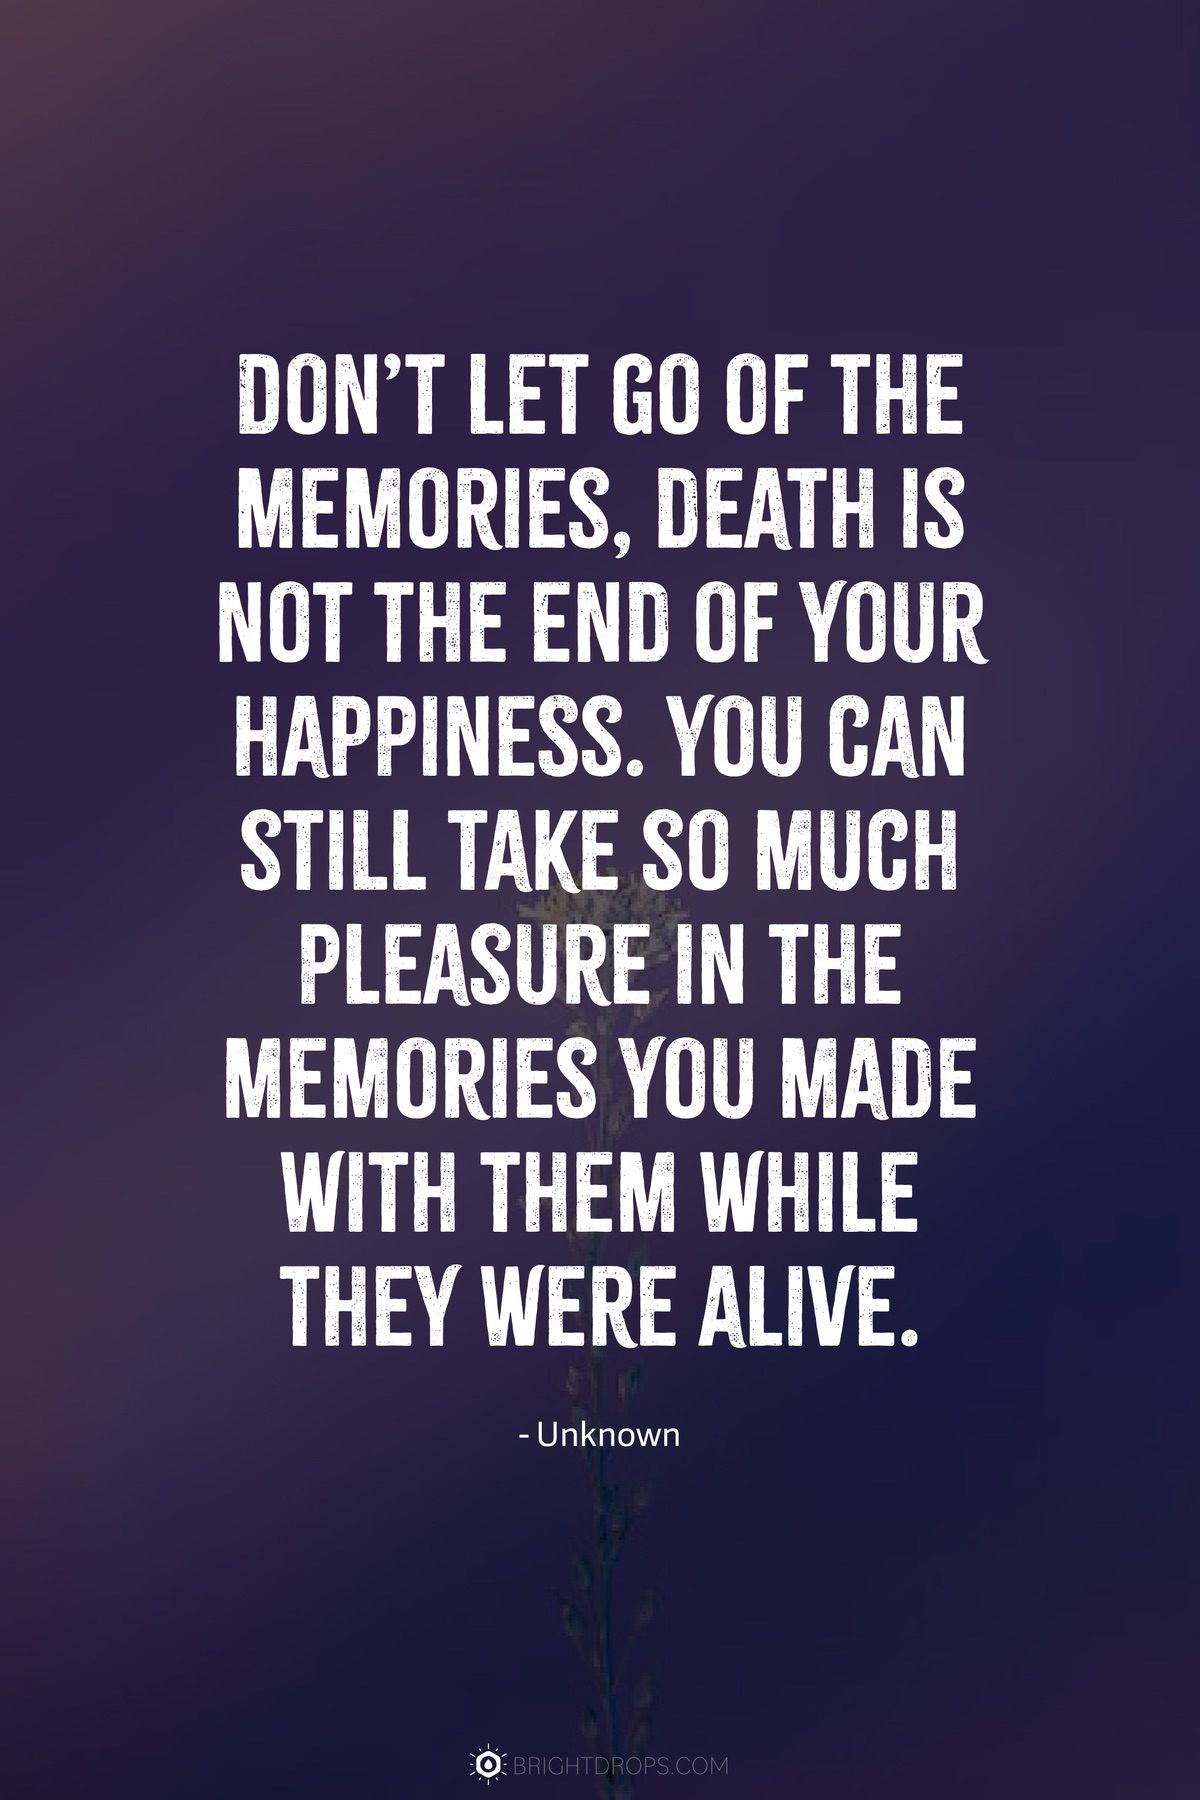 Don’t let go of the memories, death is not the end of your happiness. You can still take so much pleasure in the memories you made with them while they were alive.